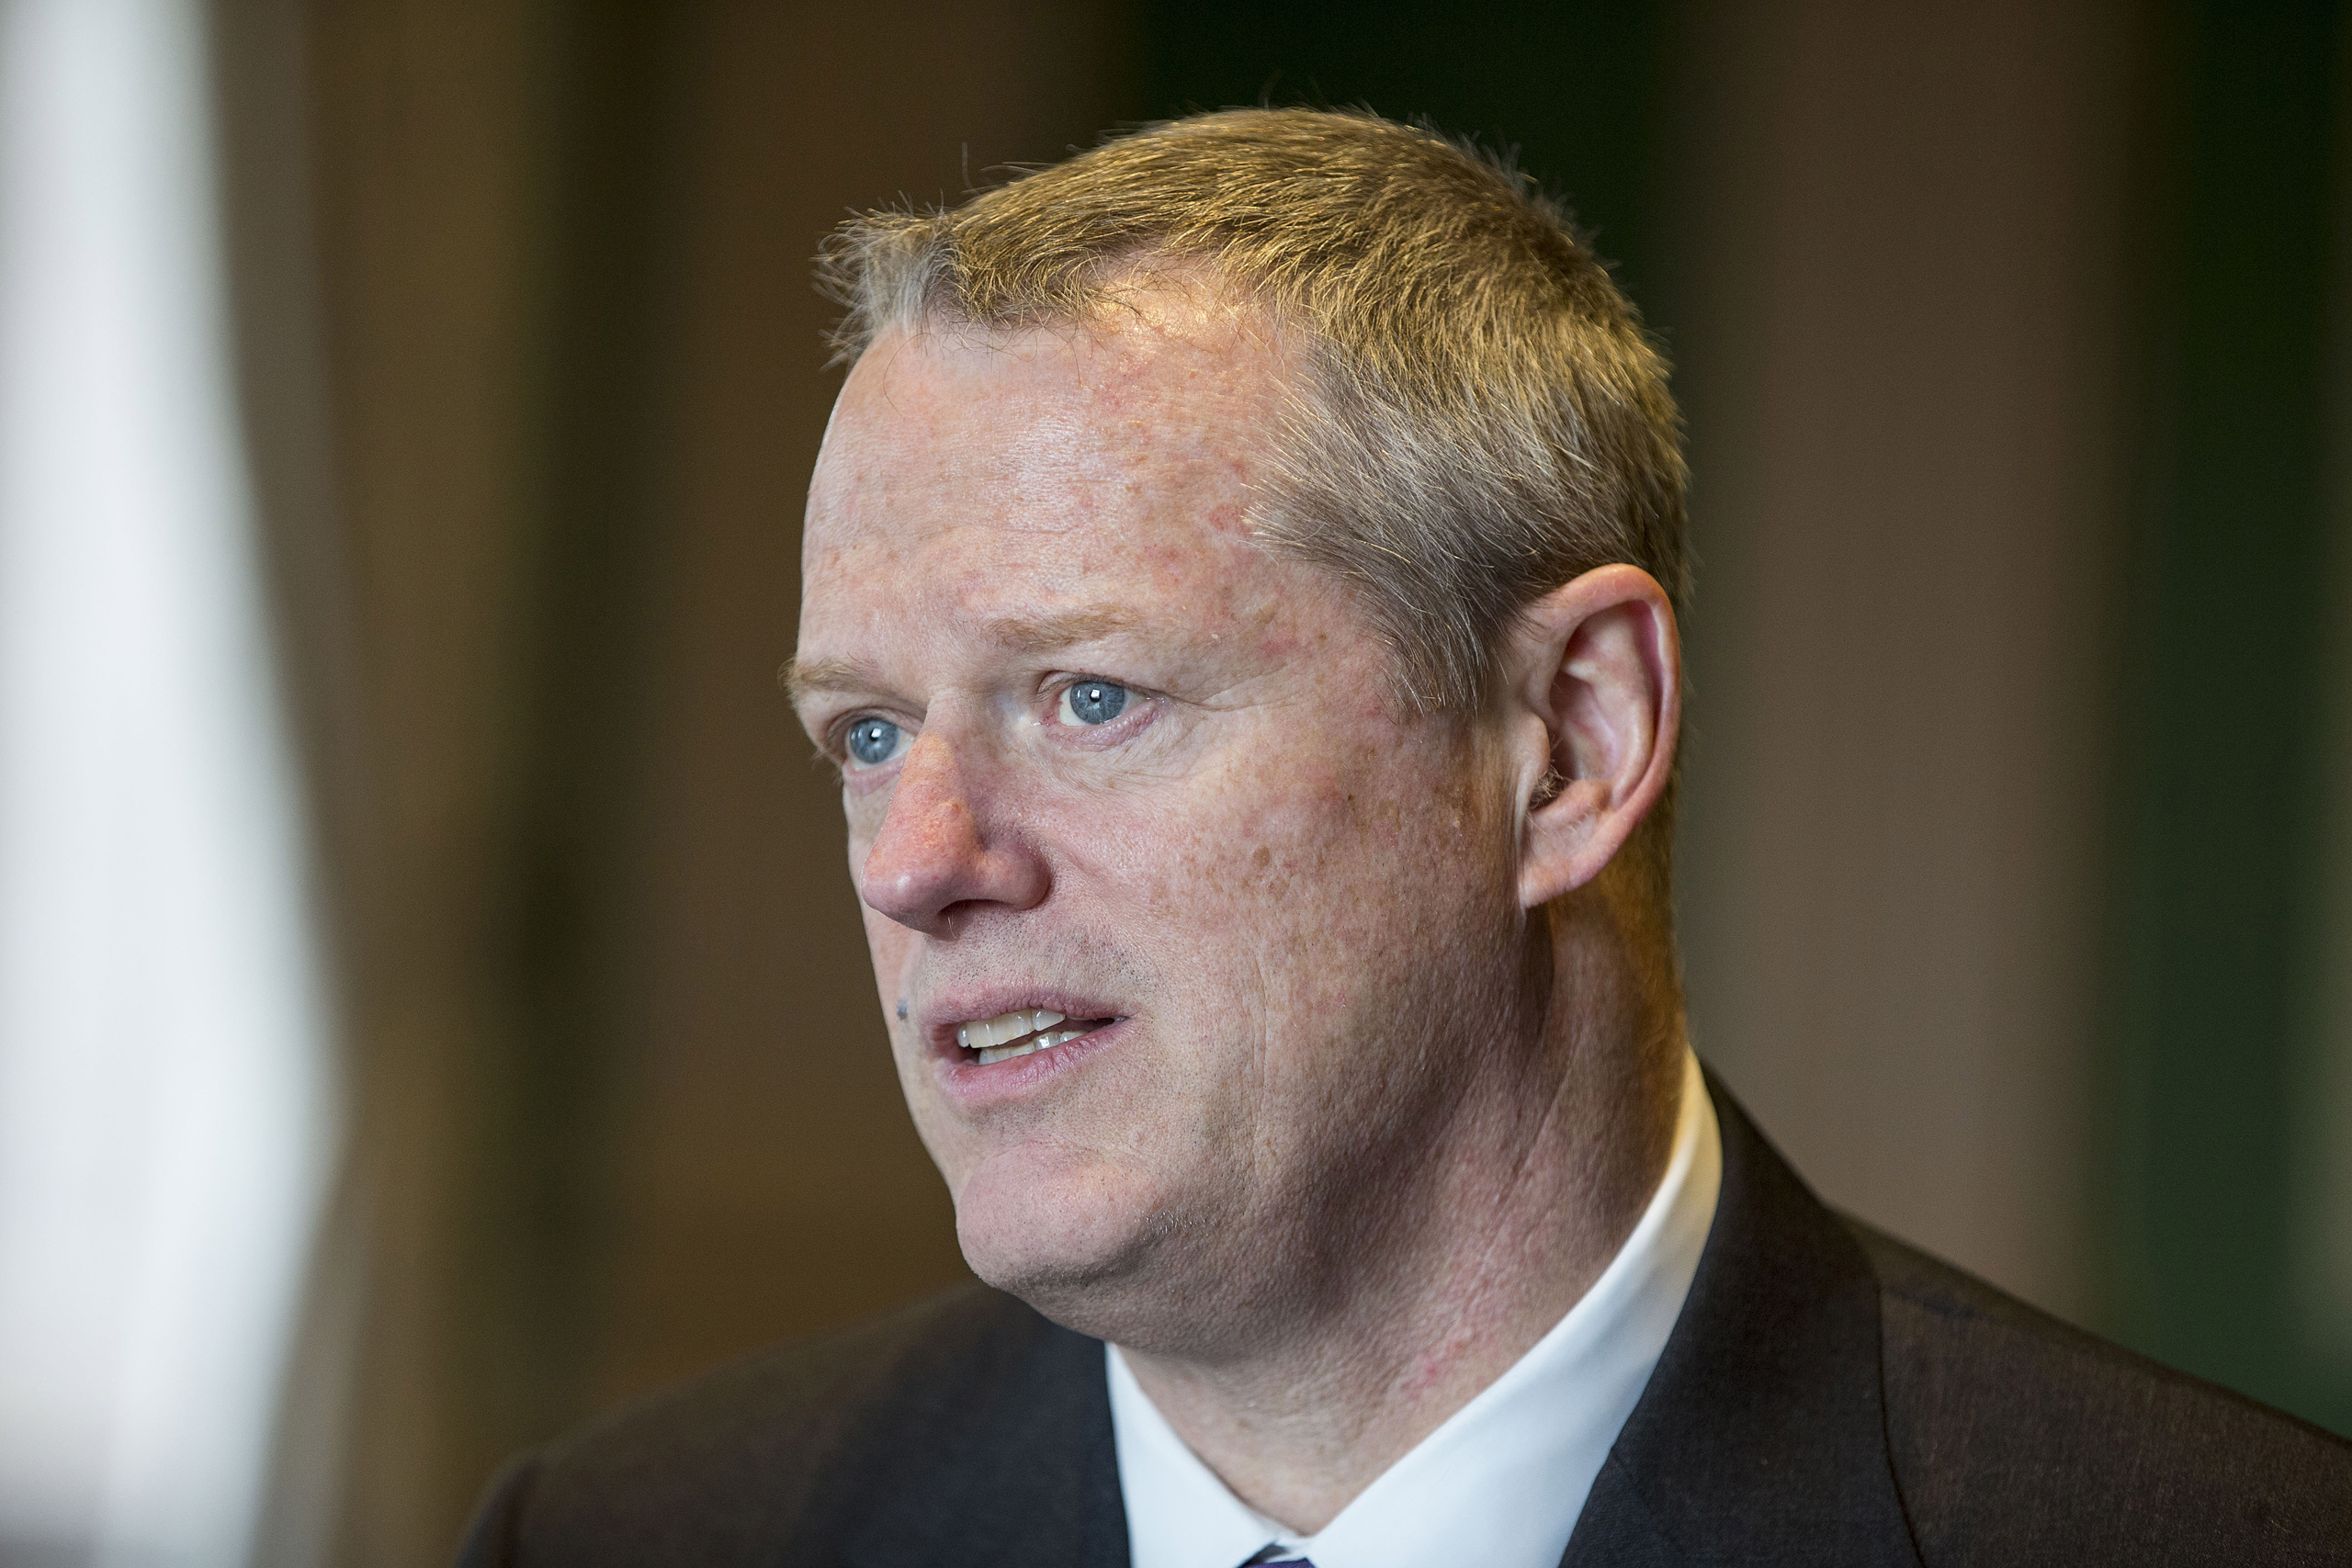 Gov. Charles "Charlie" Baker, of Massachusetts, speaks during an interview at the Statehouse in Boston on April 25, 2016. (Bloomberg/Getty Images)